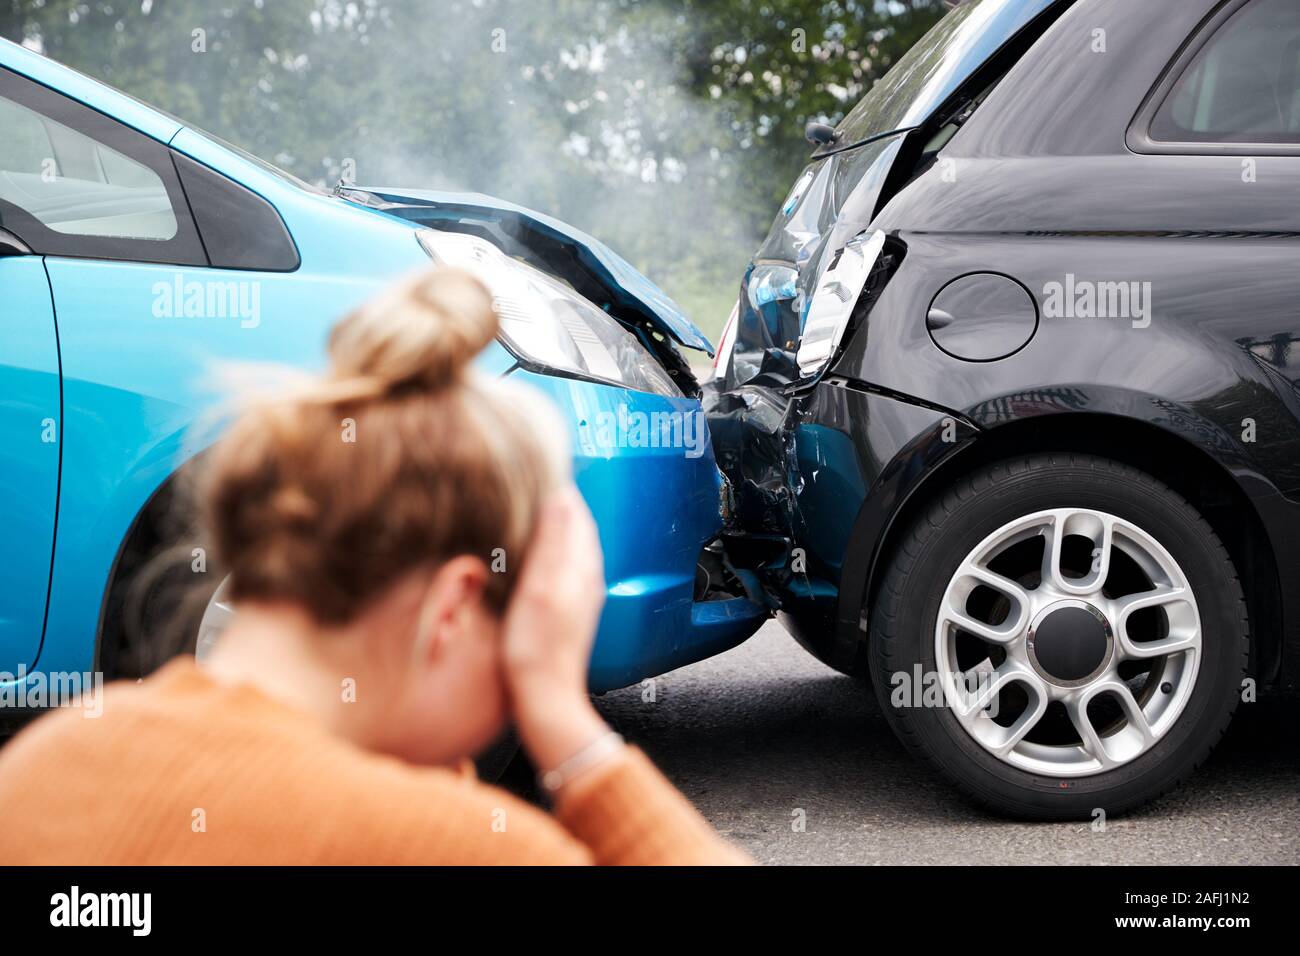 Female Motorist With Head In Hands Sitting Next To Vehicles Involved In Car Accident Stock Photo